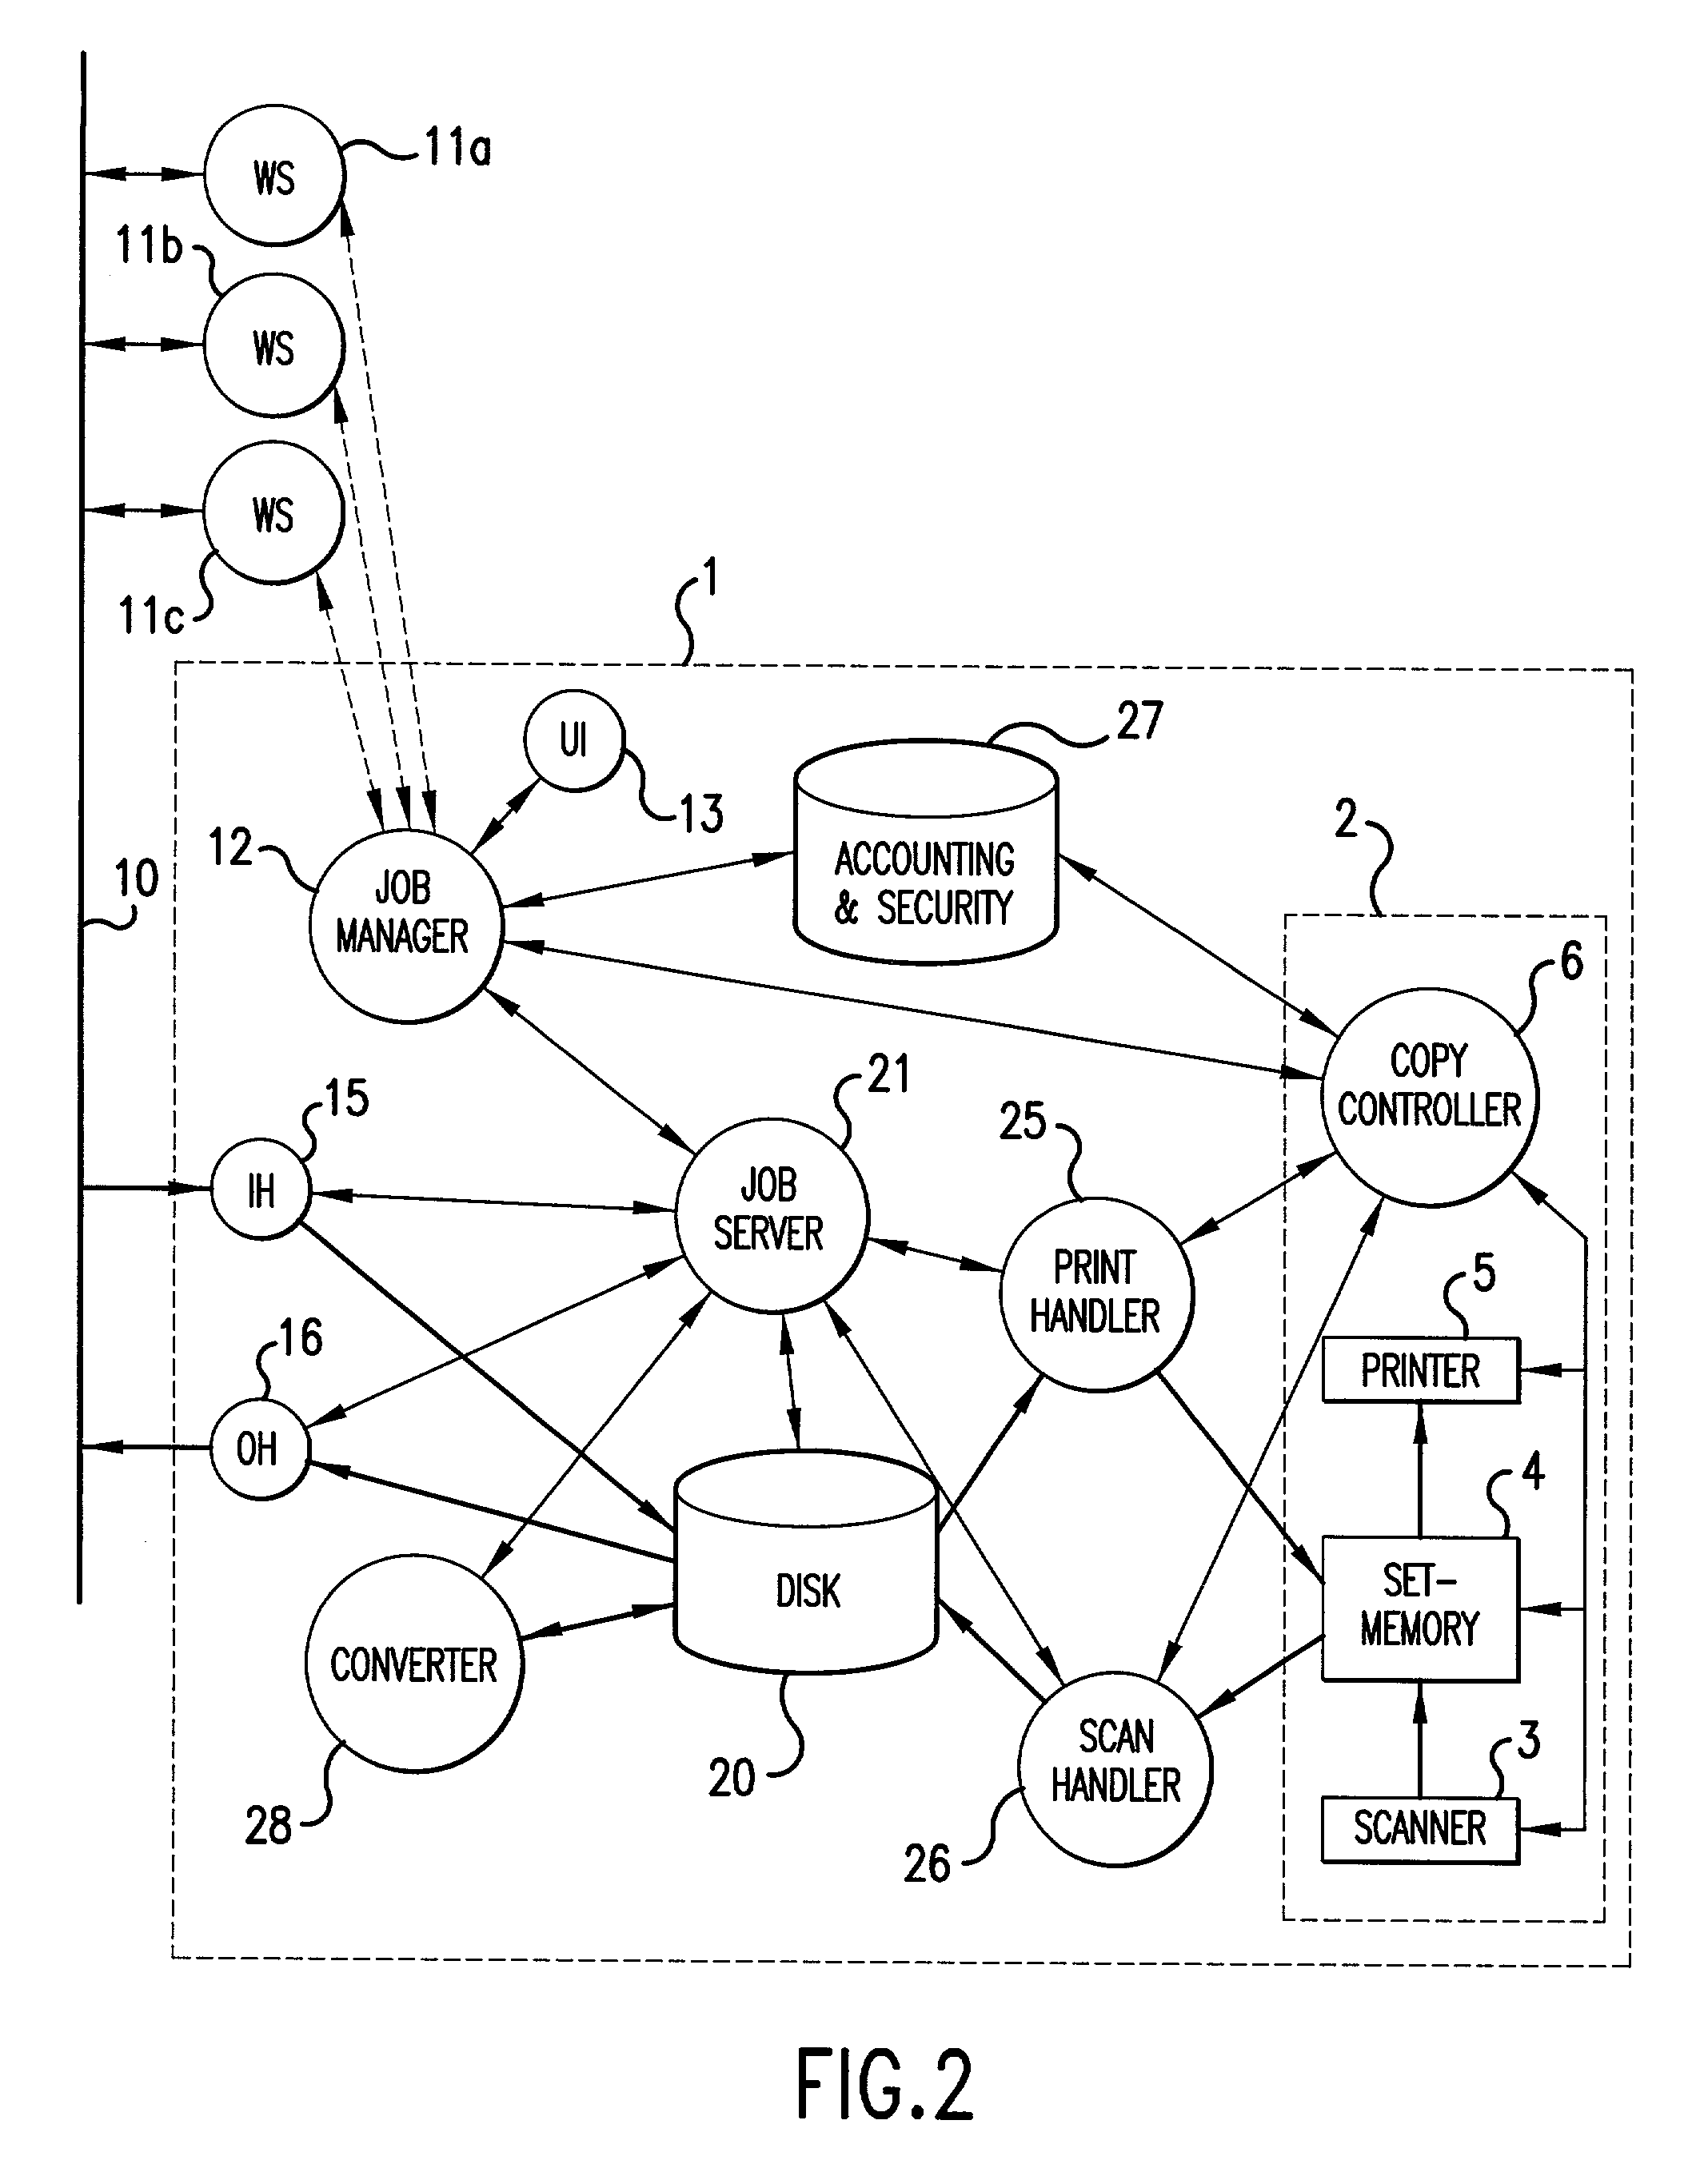 Scan and print processing in a network system having a plurality of devices